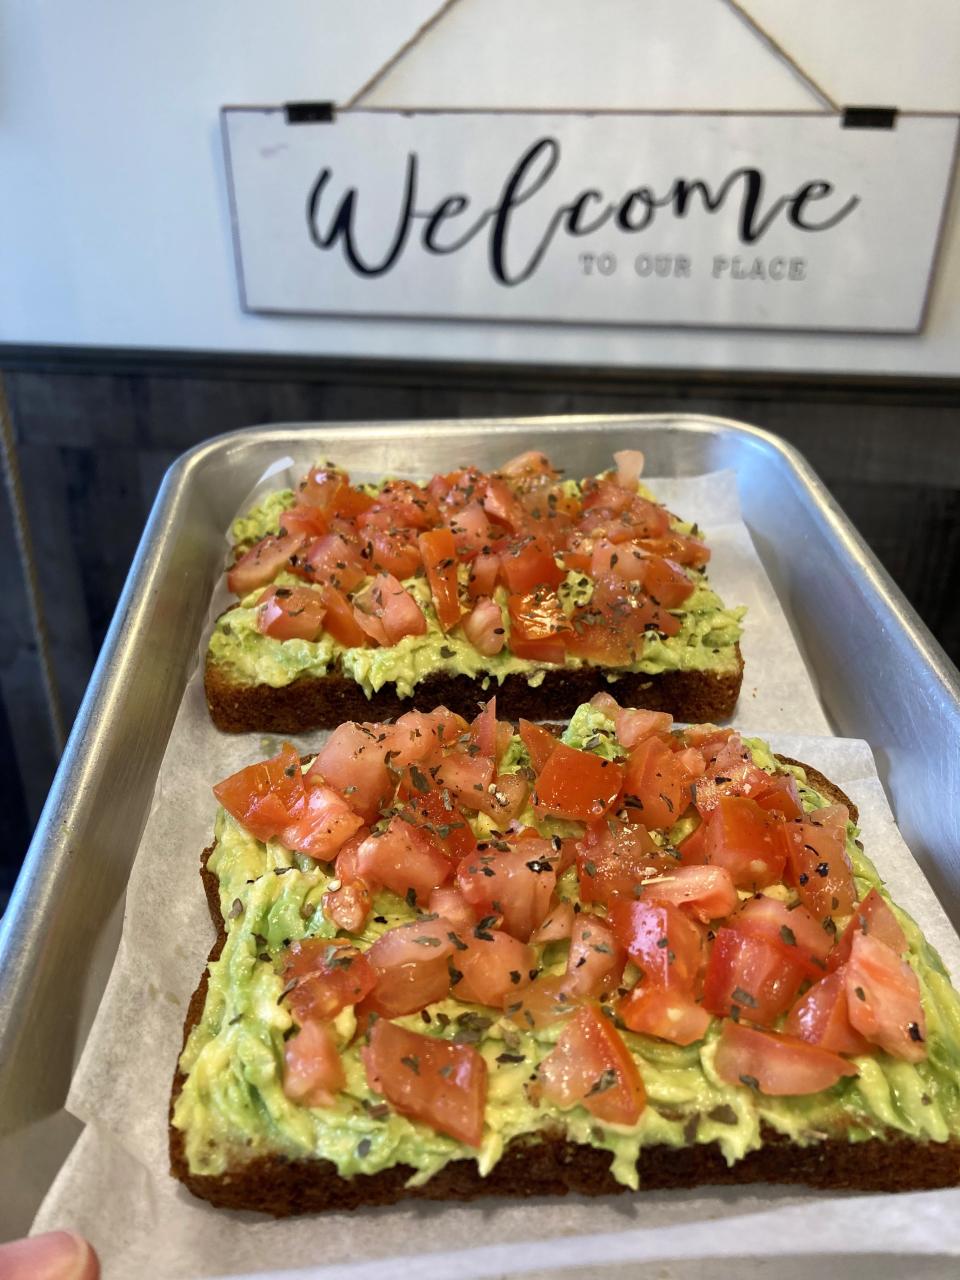 The Vegan Caprese toast at Nella's Nutri-Bar in Croton-on-Hudson is avocado toast with tomato, basil, salt and pepper. Photographed Jan. 27, 2023